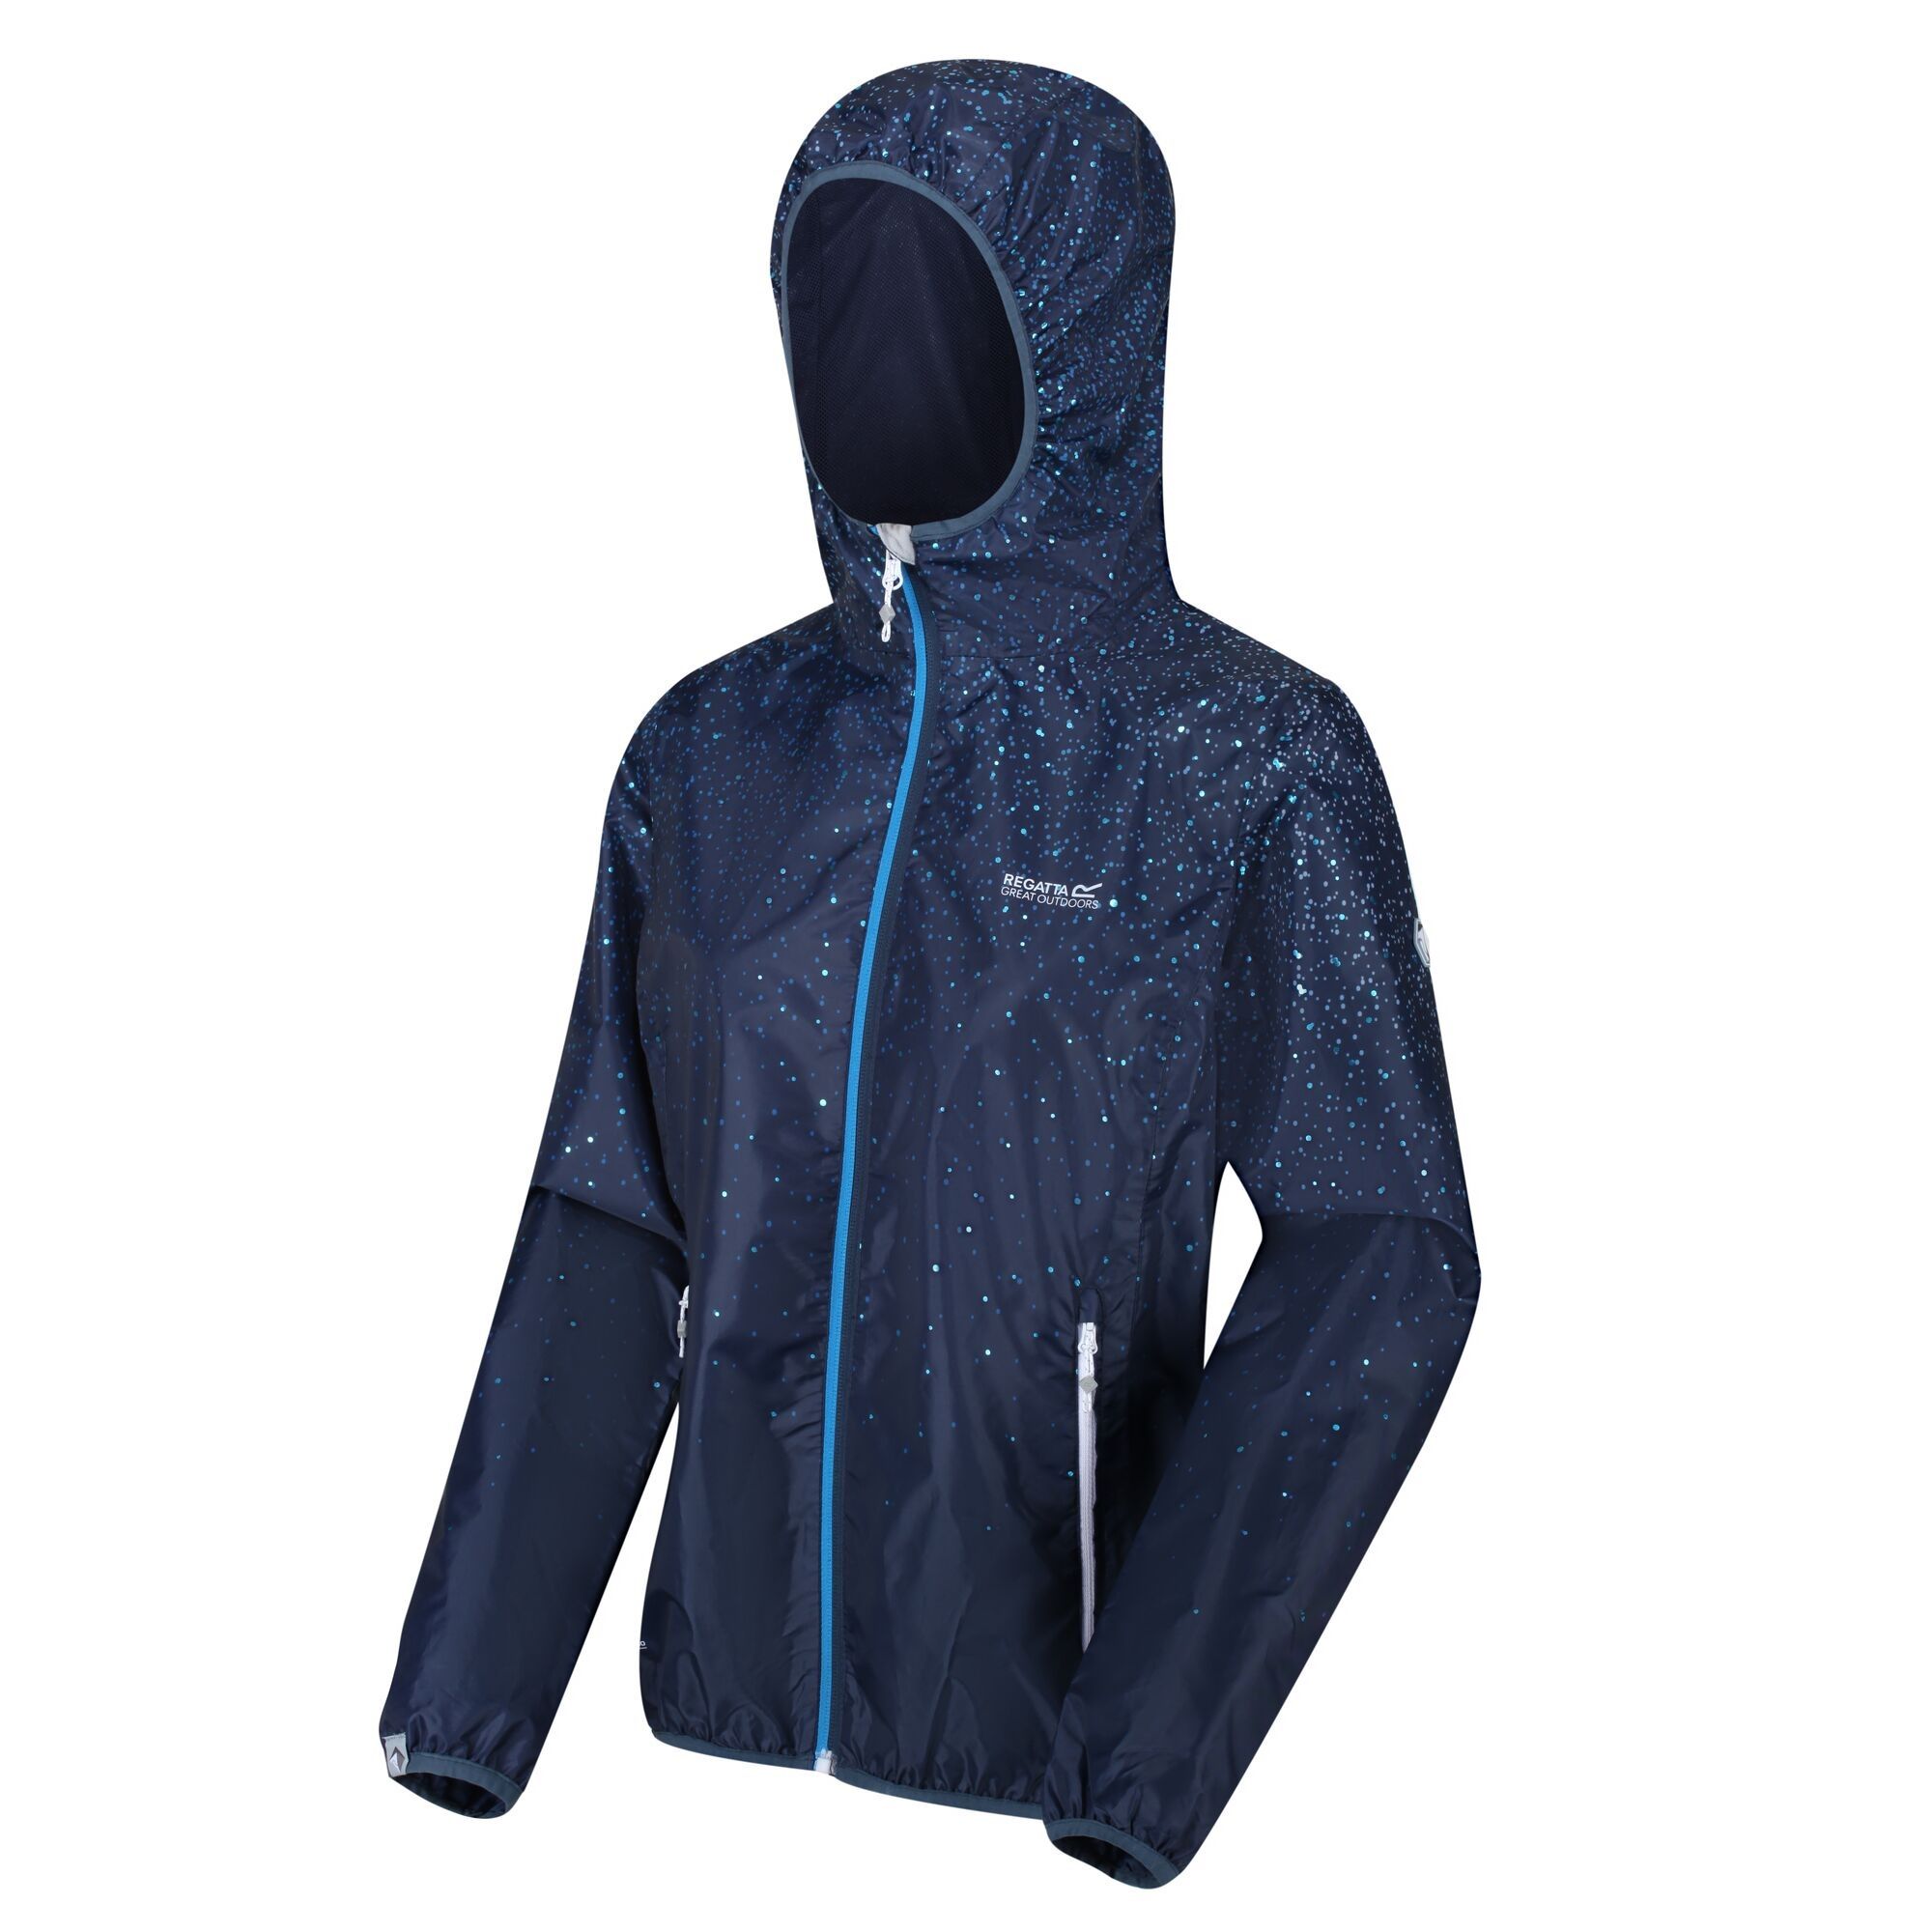 Material: 100% polyester fabric. Breathability rating 5,000g/m2/24hrs. Durable water repellent finish. Taped seams. Mesh lined. Grown on hood. 2 zipped lower pockets. Stretch binding to collar, cuffs and hem.